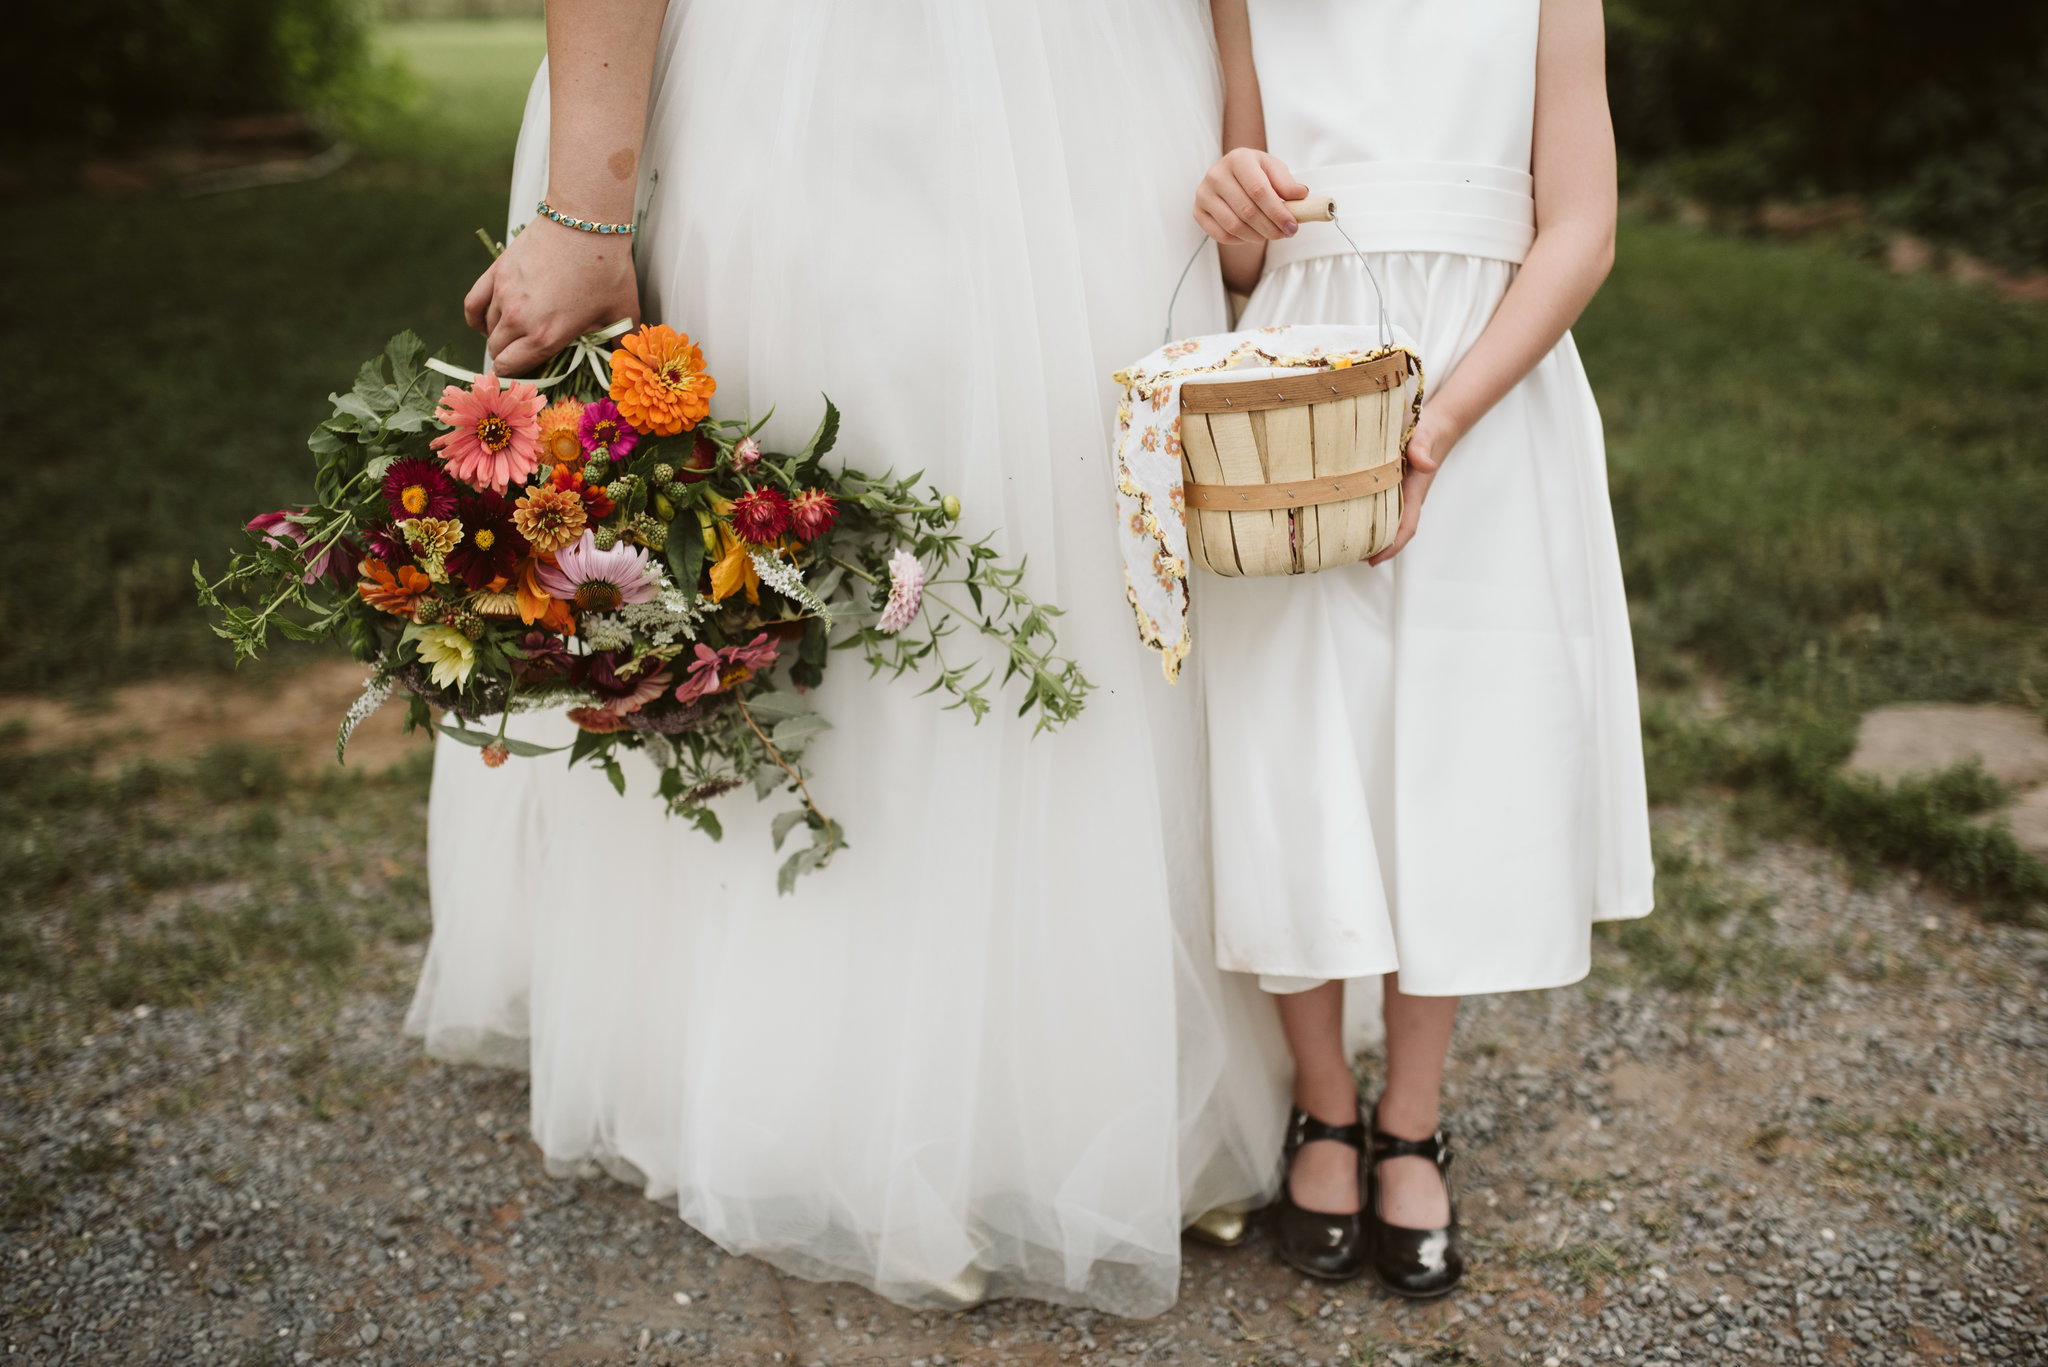 Rocklands Farm, Maryland, Intimate Wedding, Baltimore Wedding Photographer, Sungold Flower Co, Rustic, Romantic, Barn Wedding, Detail Photo of Bride and Flower Girl